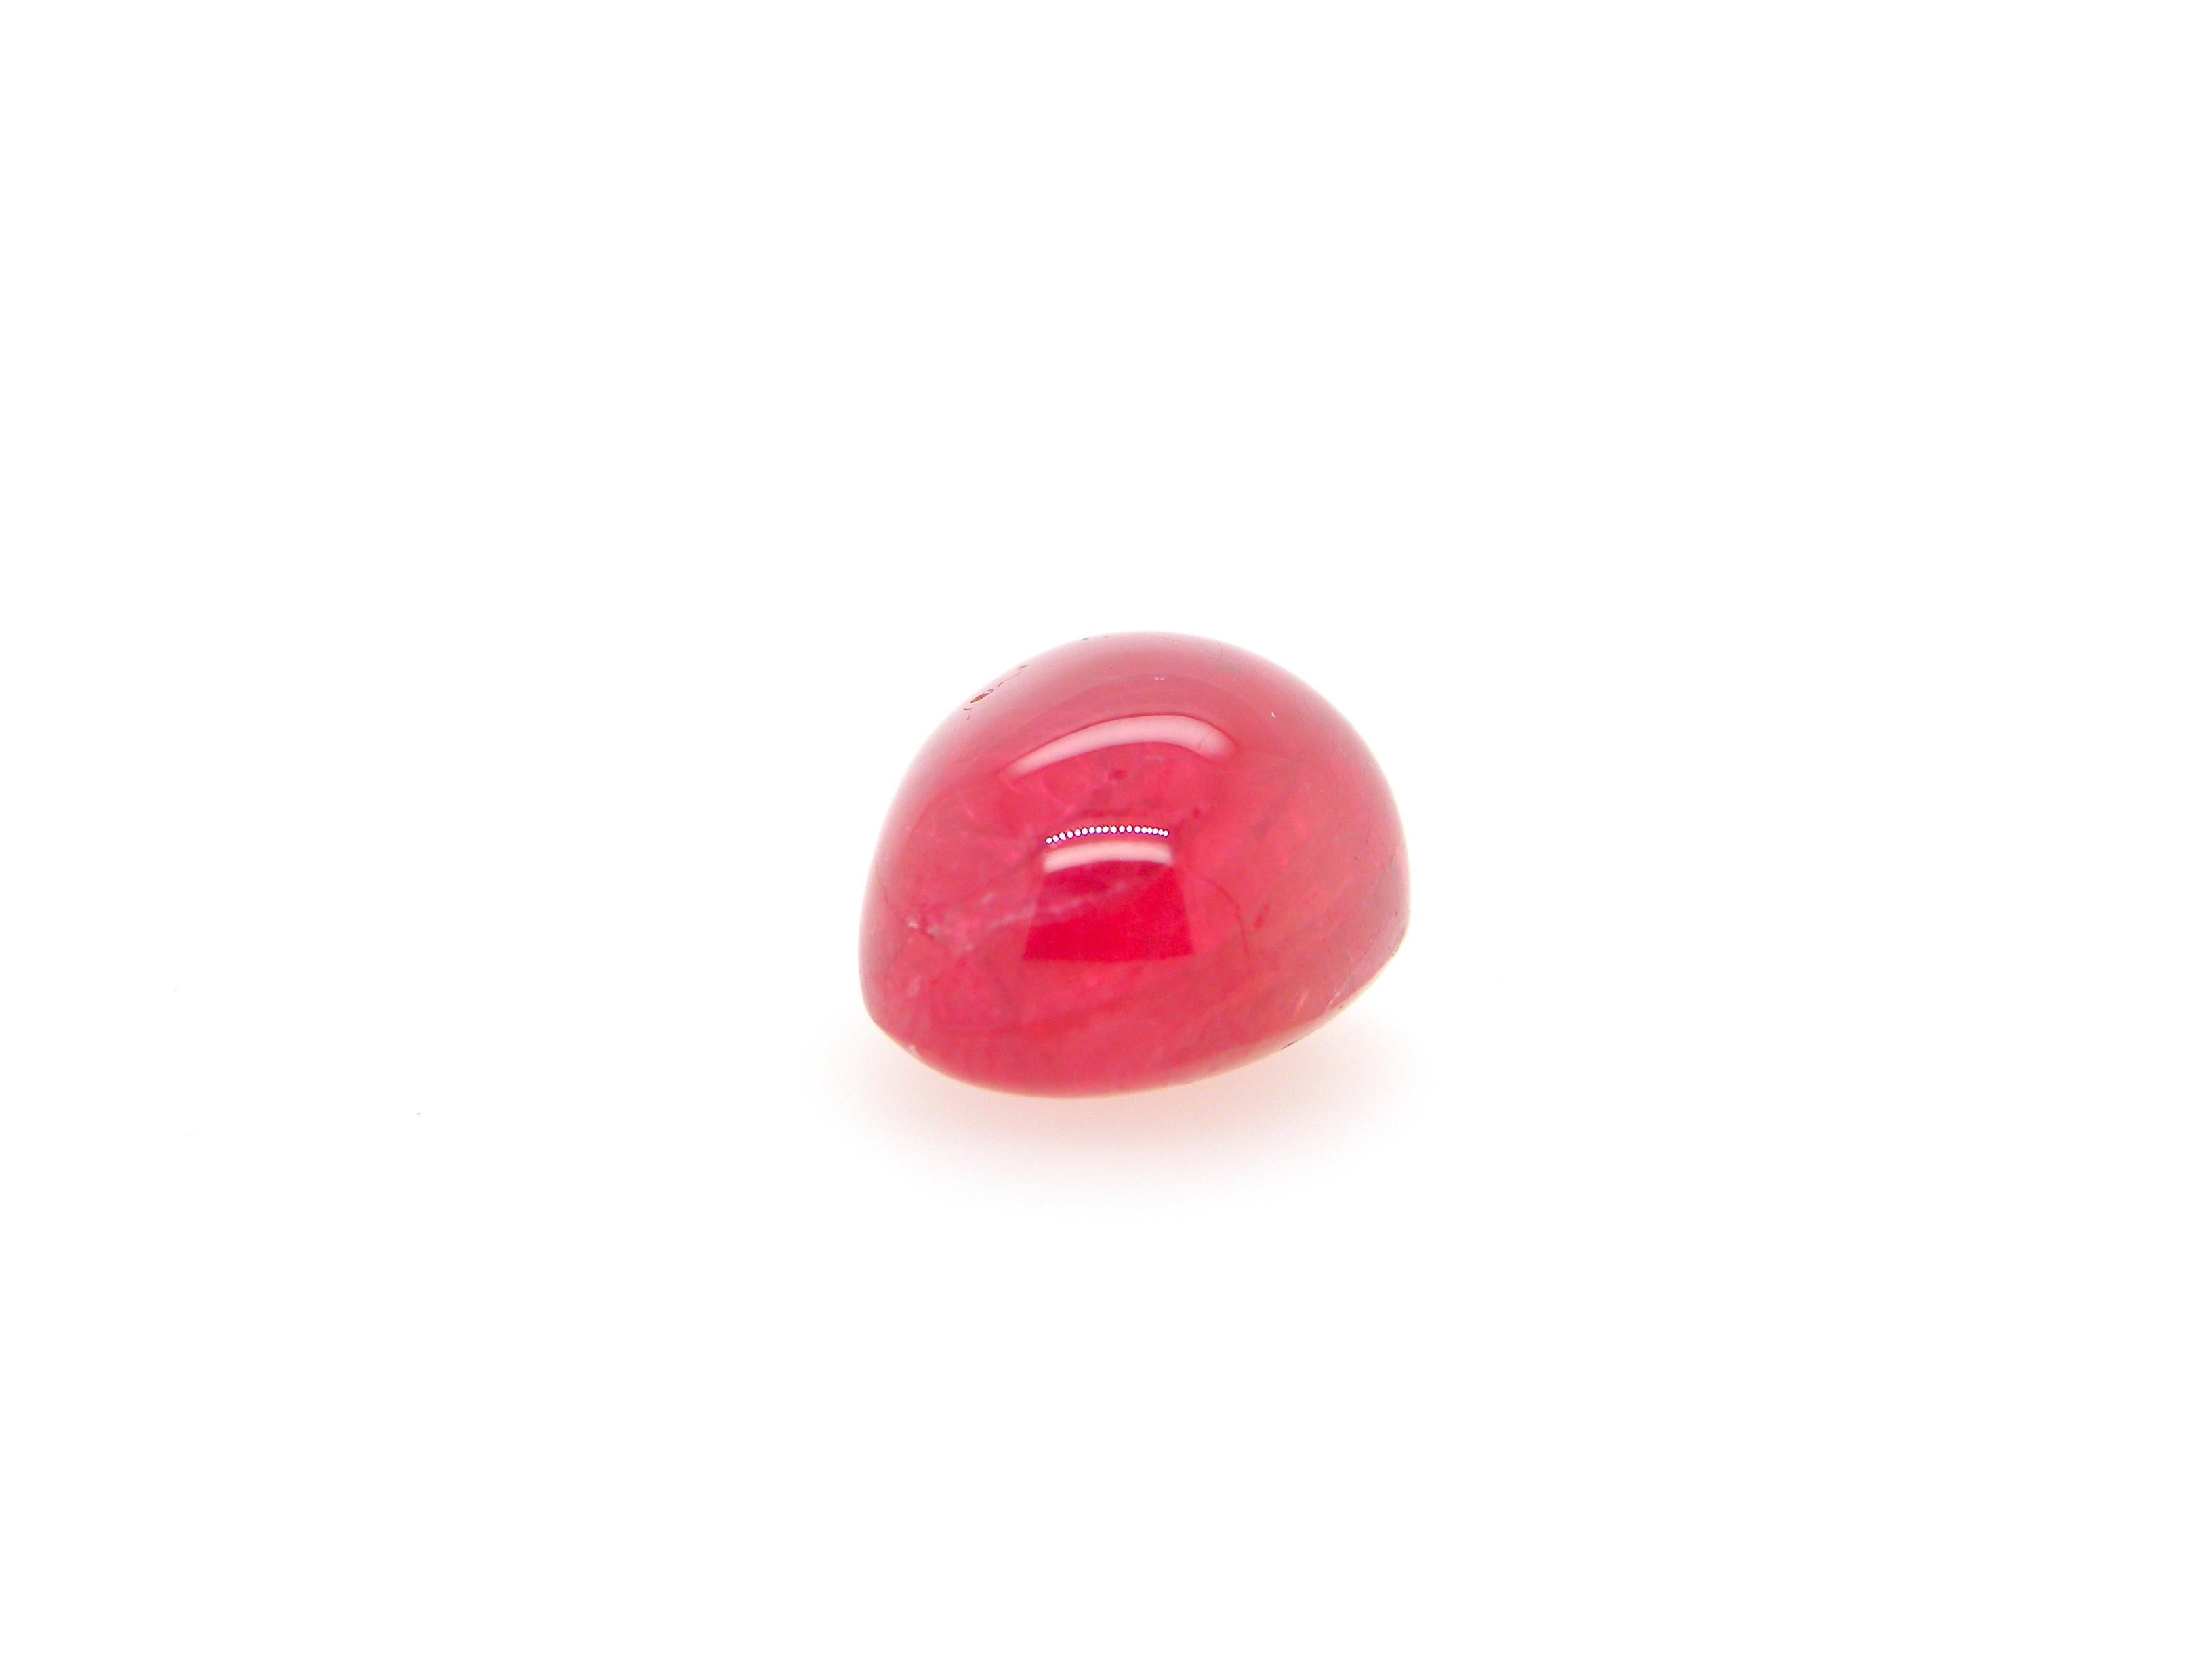 12 Carat Burma No Heat Red Spinel Cabochon For Sale 4